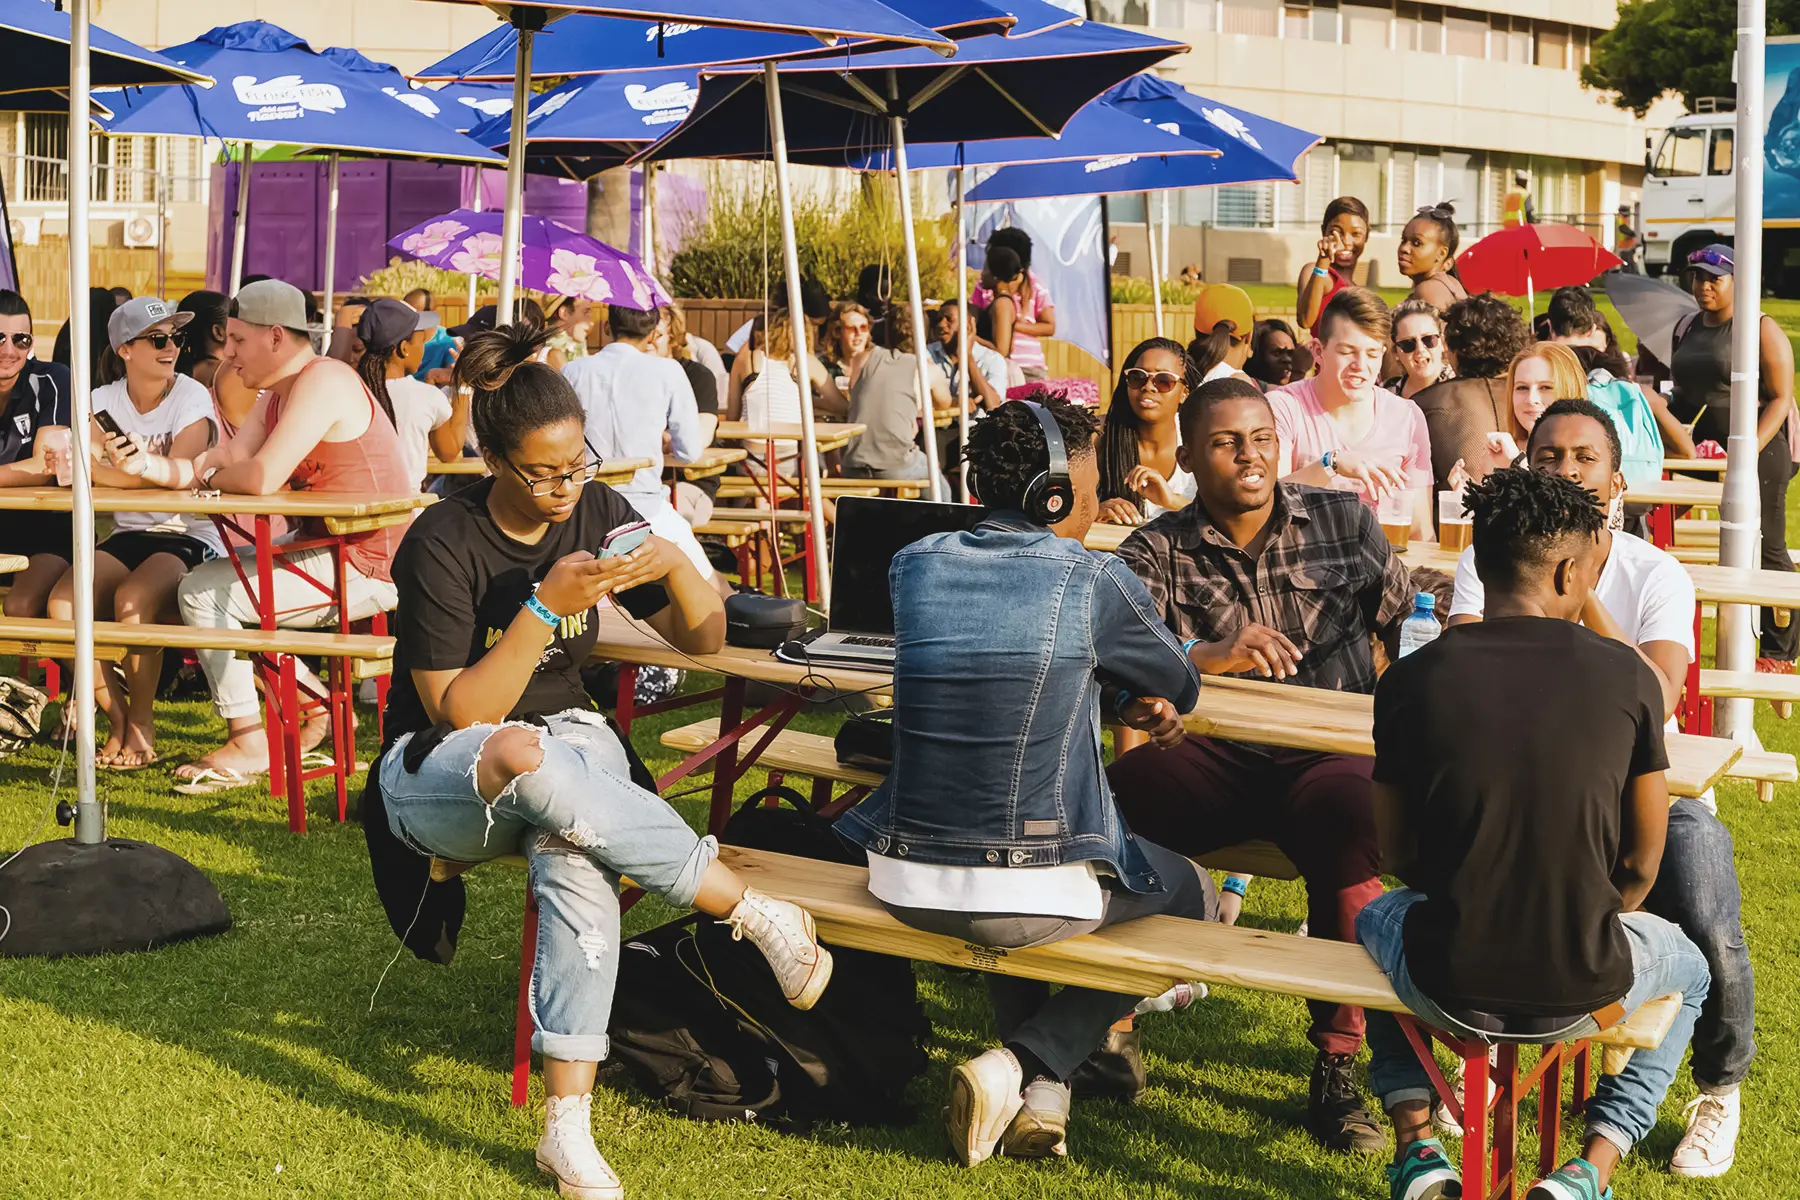 A diverse young people sitting at the tables at the outdoor beer garden in Johannesburg, South Africa